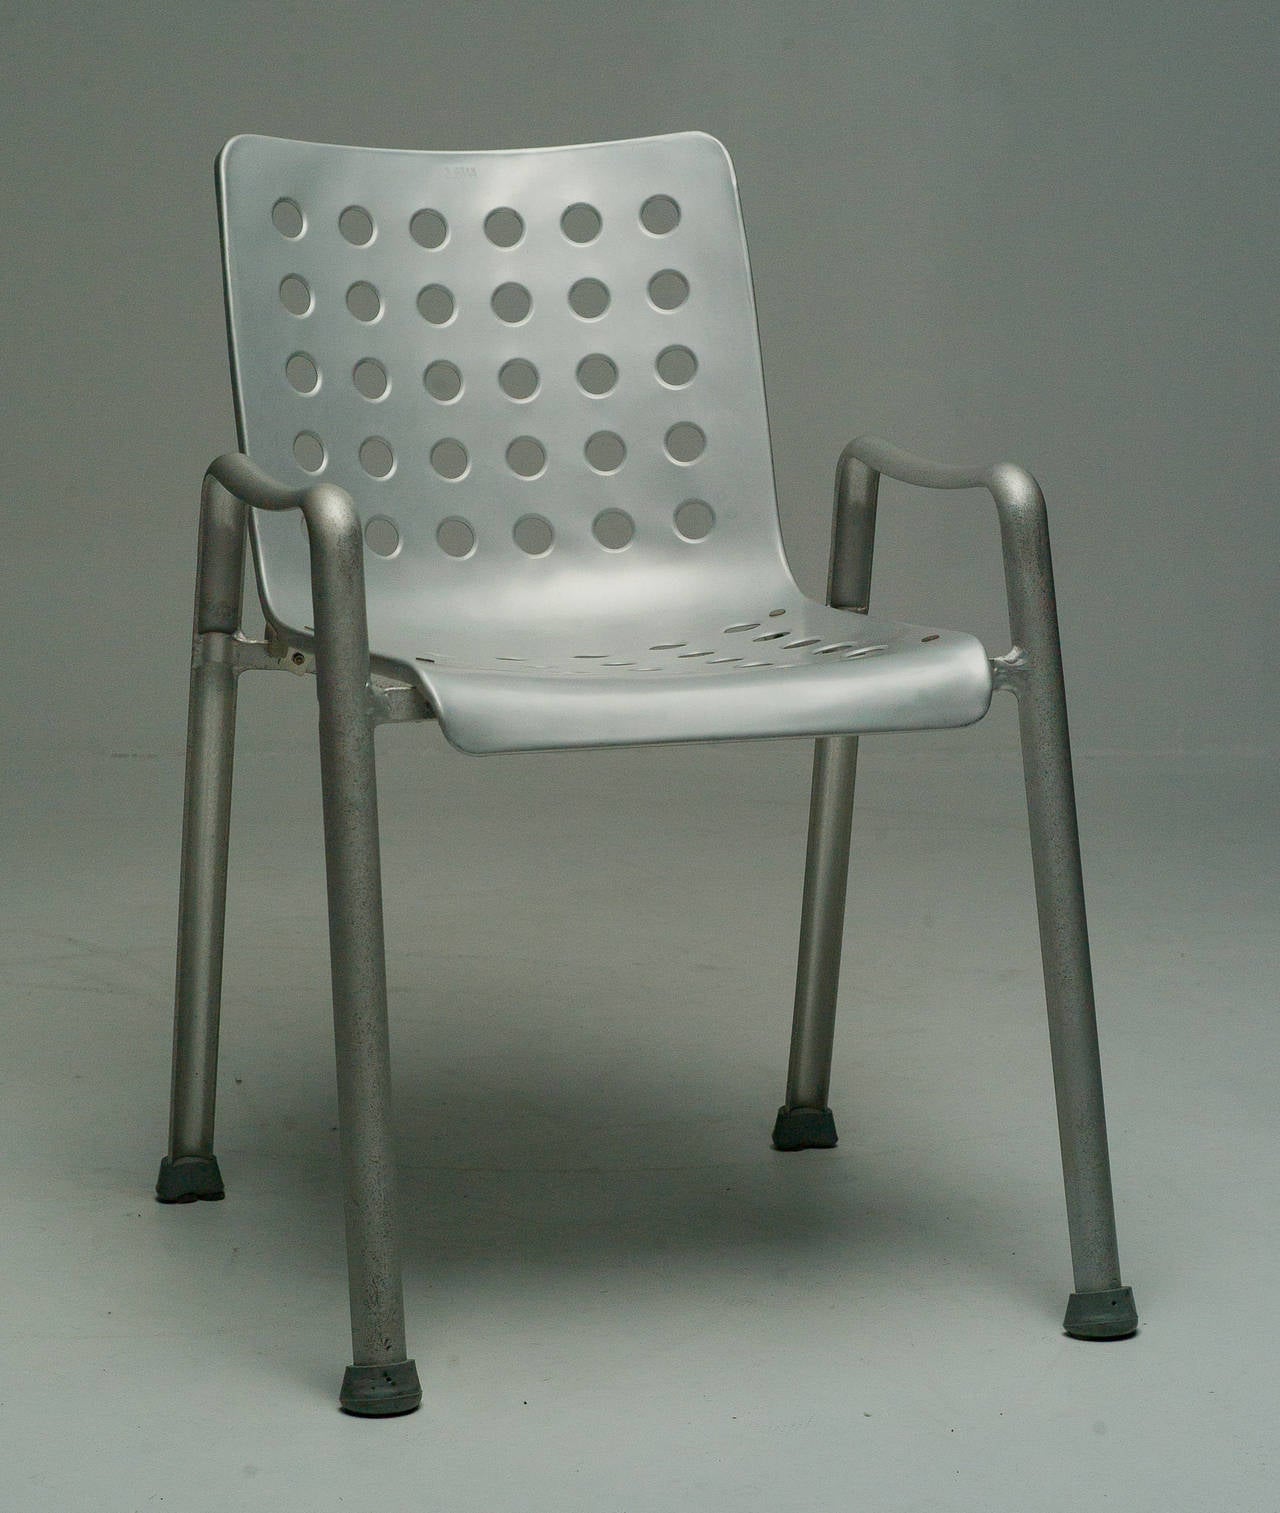 A beautiful aluminium stacking chair. Designed by Hans Coray for the Swiss National Exhibition in Zurich in 1938, executed in the 1970s by P. & W. Blattmann Metallwarenfabrik Wädenswil (MEWA), Switzerland. Marked.
We offer museum quality crating